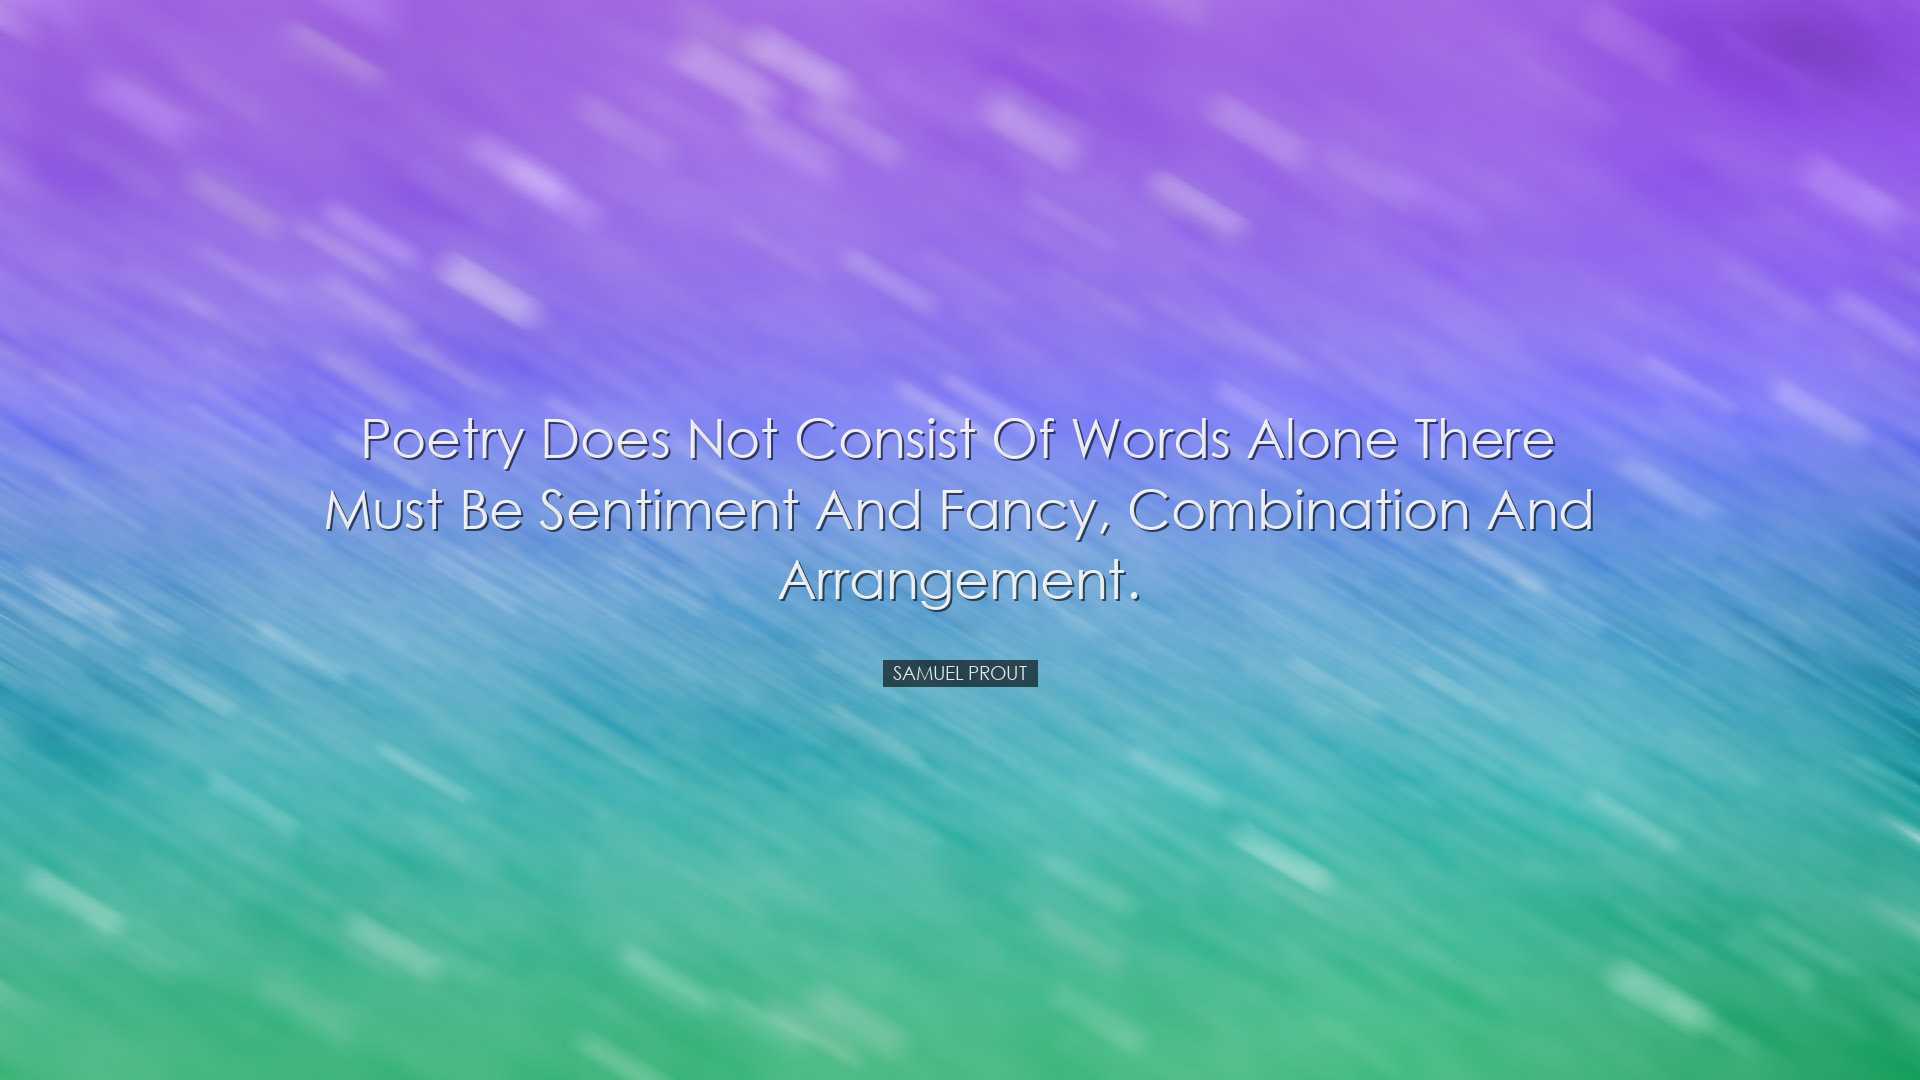 Poetry does not consist of words alone there must be sentiment and